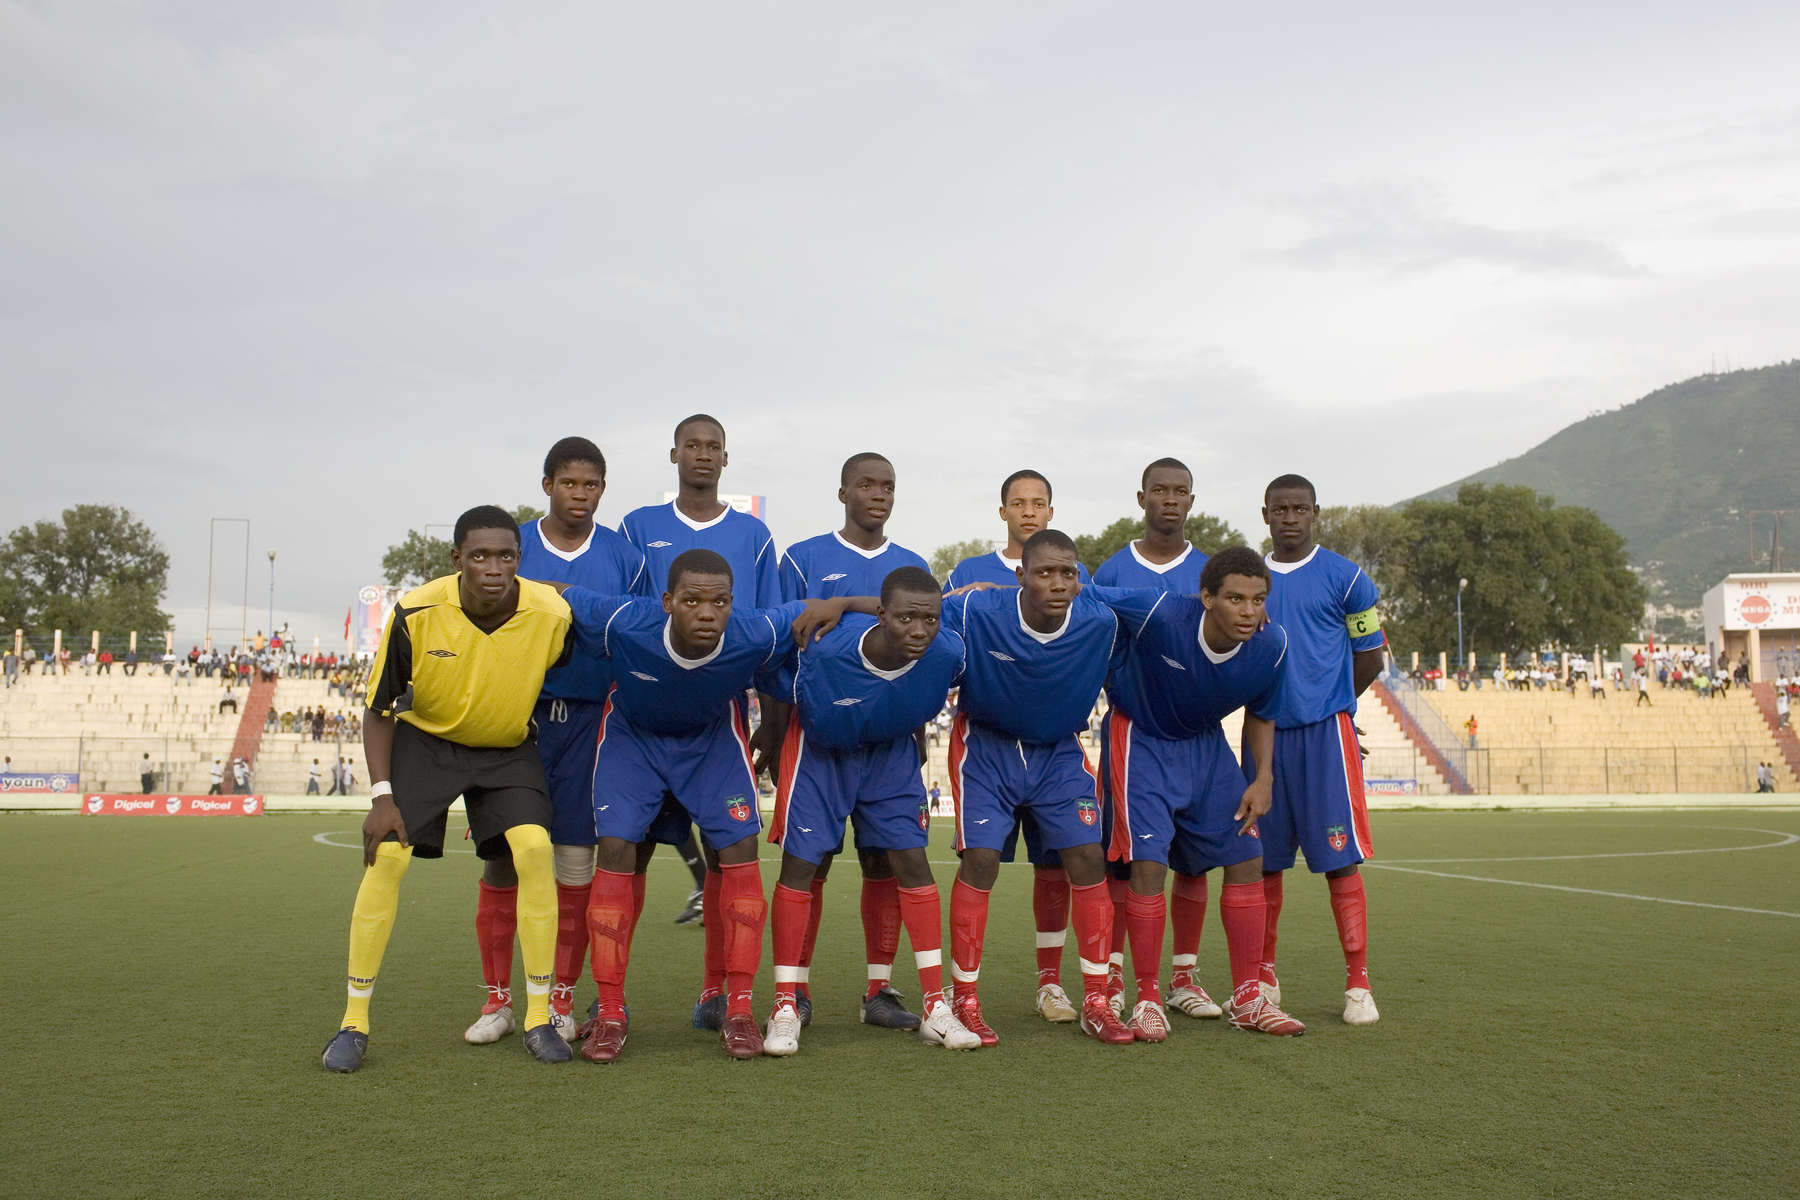 The Haitian under 17 team pose for a photograph before a match against the USA's Cleveland Cavalier's at the Sylvio Cator Stadium. They went on to win the game. In 1974 Haiti won a place at the World Cup Finals. 33 revolutionary years later the impoverished country's under 17 team played at the FIFA U-17 World Cup Finals in South Korea.In disaster areas, war zones and urban wastelands, football keeps humanity alive. It brings nations together and promotes unity. It encourages equality and generates pride and self-belief. It has the power to heal and to help, to motivate, to give freedom to dreams and empower a generation. There are millions of people playing the game or helping it to flourish who find that football brings a positive dimension to their lives.Away from the billionaire owned clubs with it's multi-million dollar players, Football's Hidden Story is a series of emotive human interest photographs showing the positive impact football has had at grassroot level on individuals and communities all around the world. 